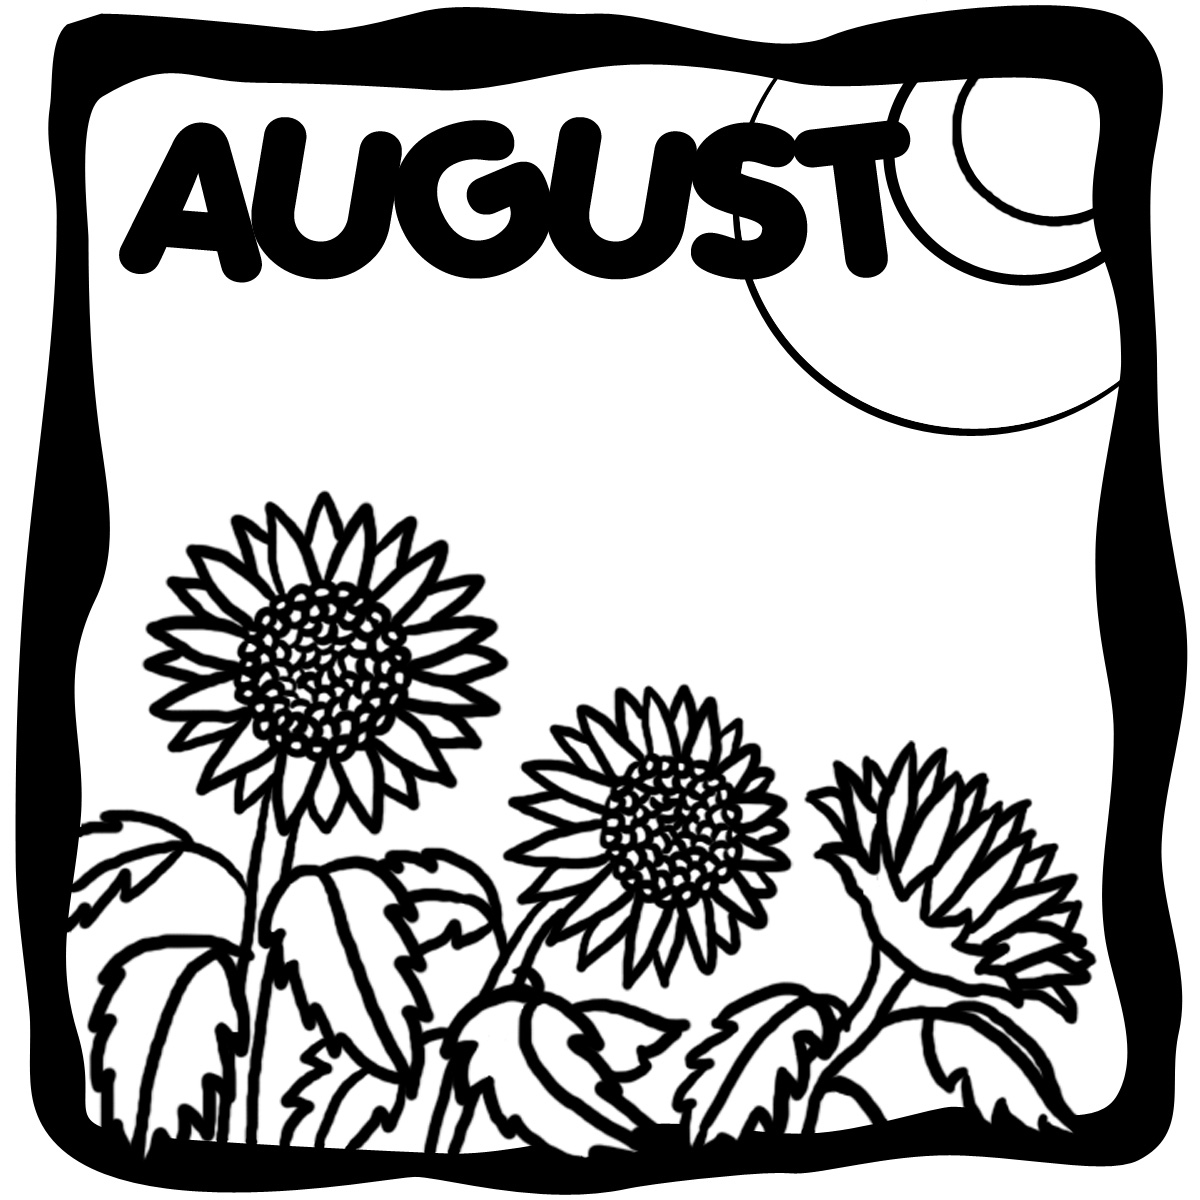 August clipart by month image 9